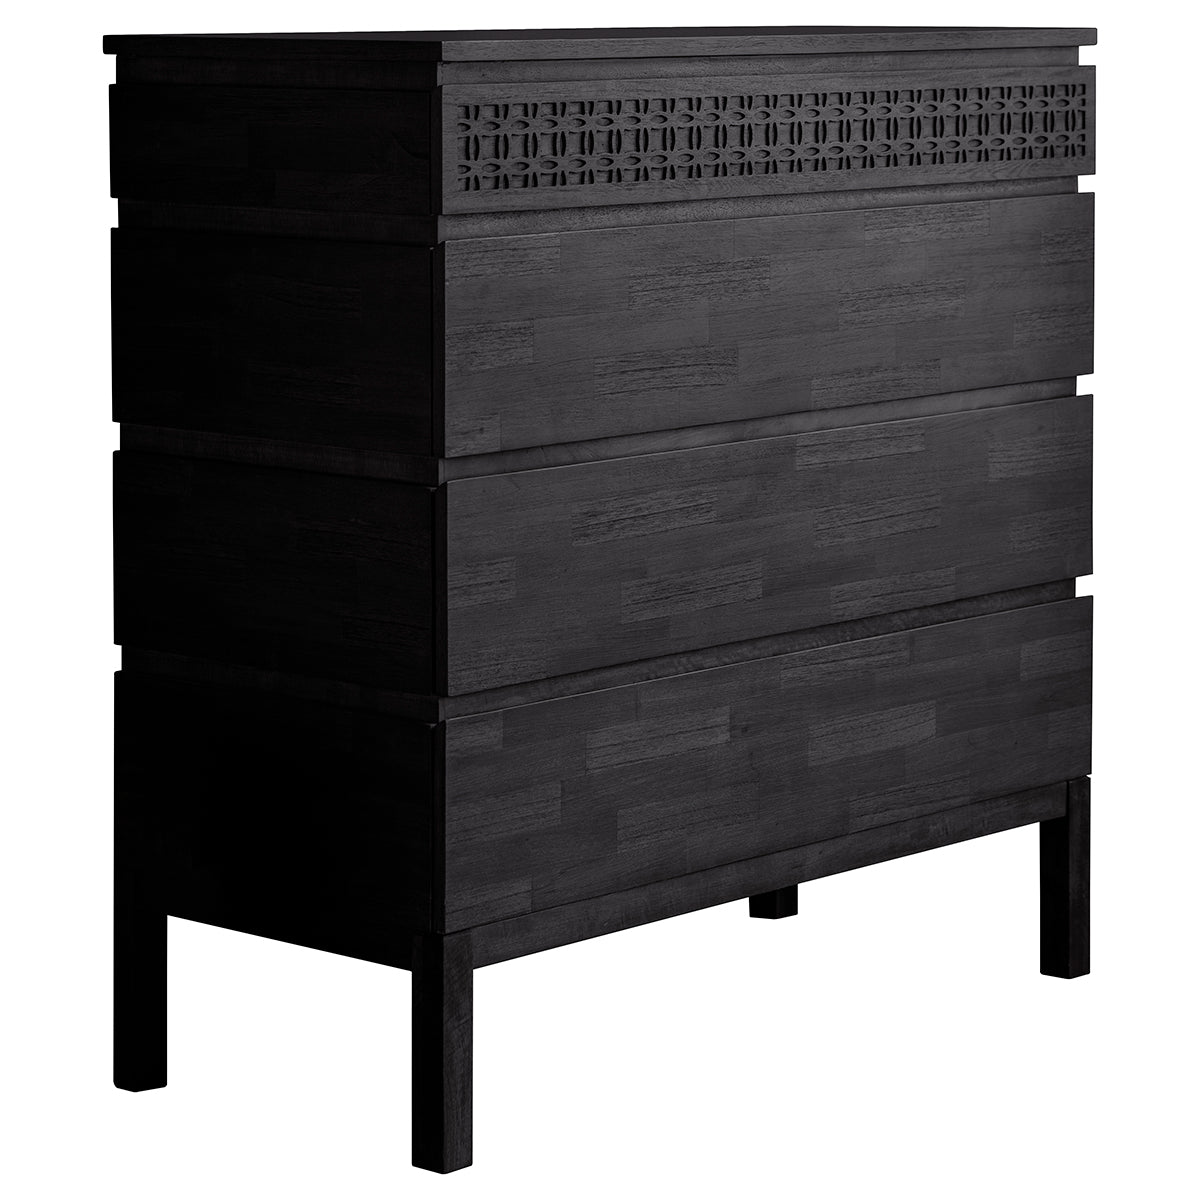 A Dartington Boutique 4 Drawer Chest for interior decor displayed against a white background.